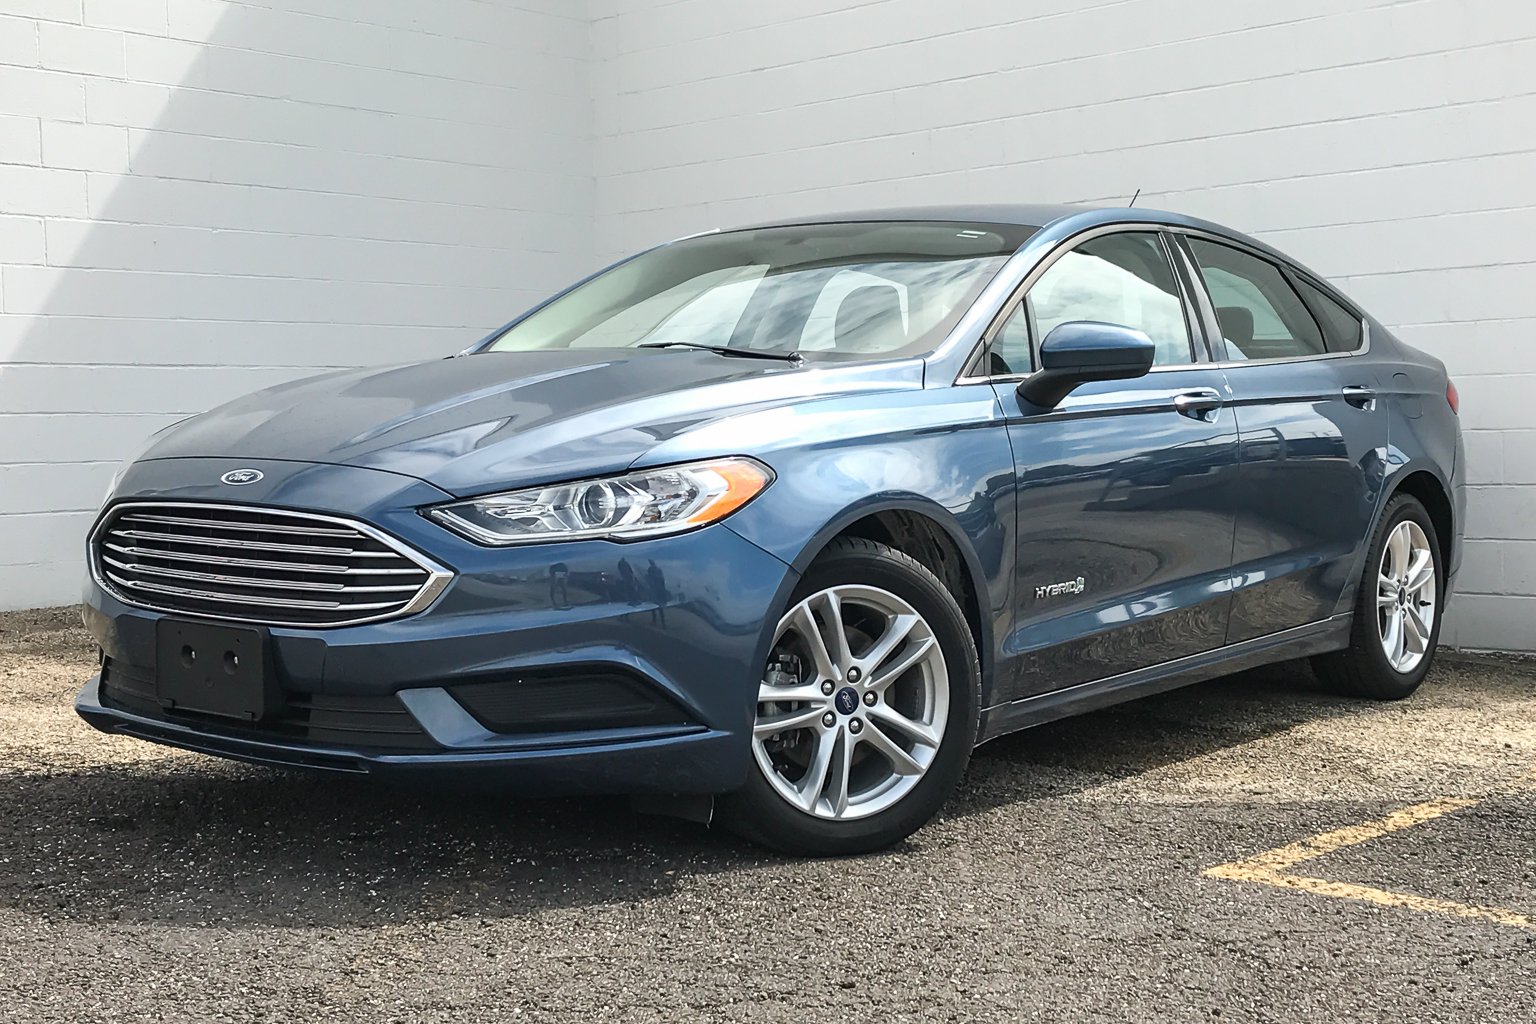 Pre-Owned 2018 Ford Fusion Hybrid S FWD 4dr Car in Morton #145545